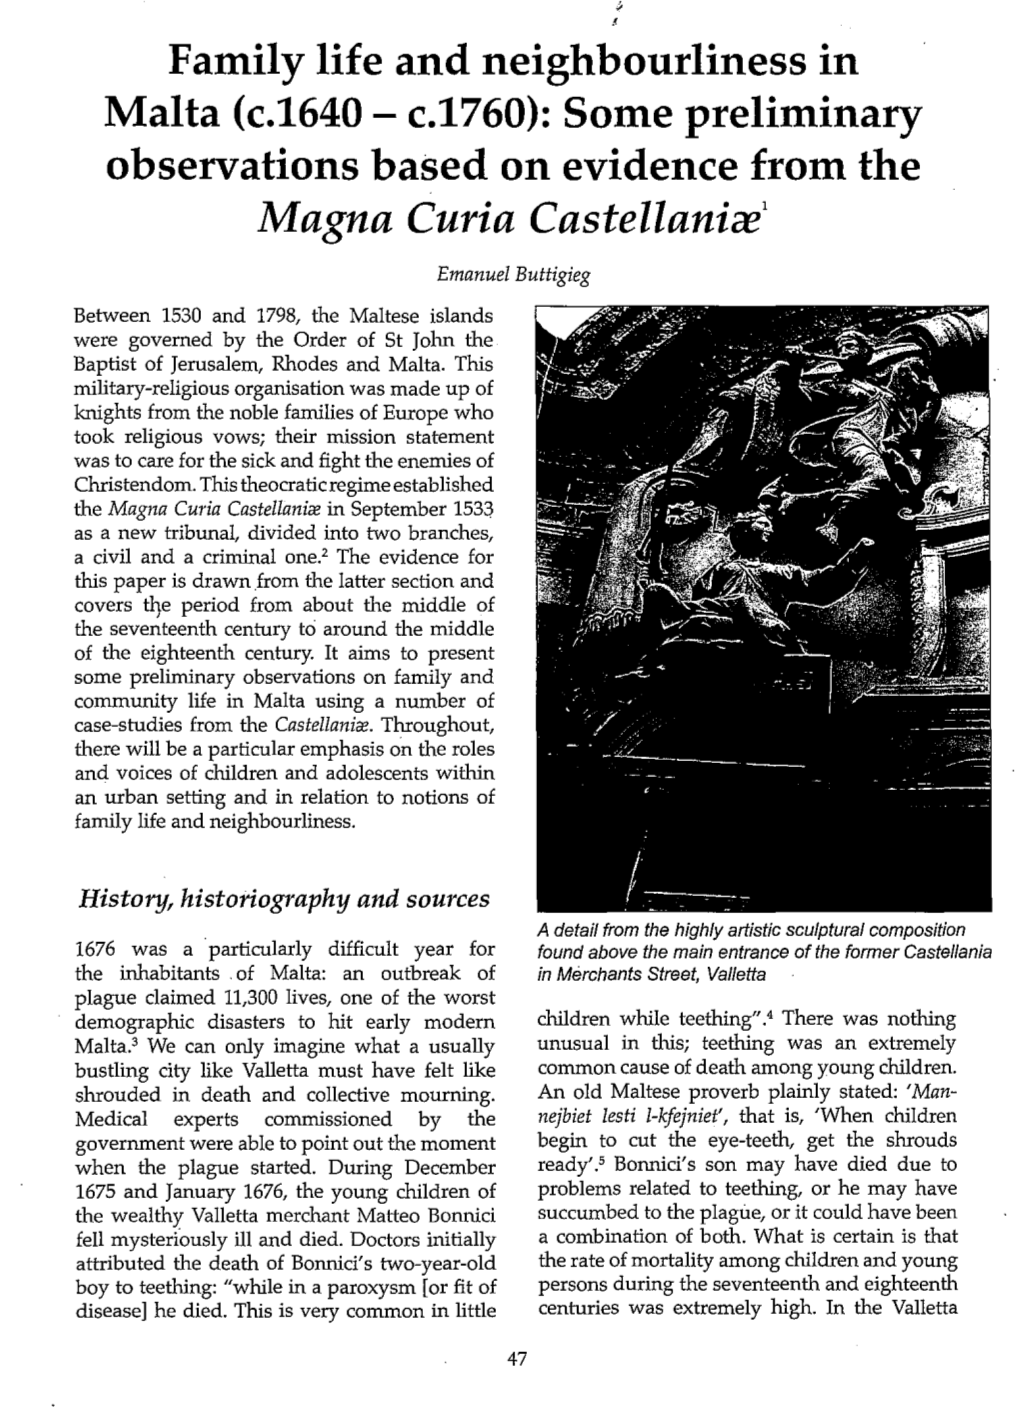 Family Life and Neighbourliness in Malta (C.1640- C.1760): Some Preliminary Observations Based on Evidence from the Magna Curia Castellanire'